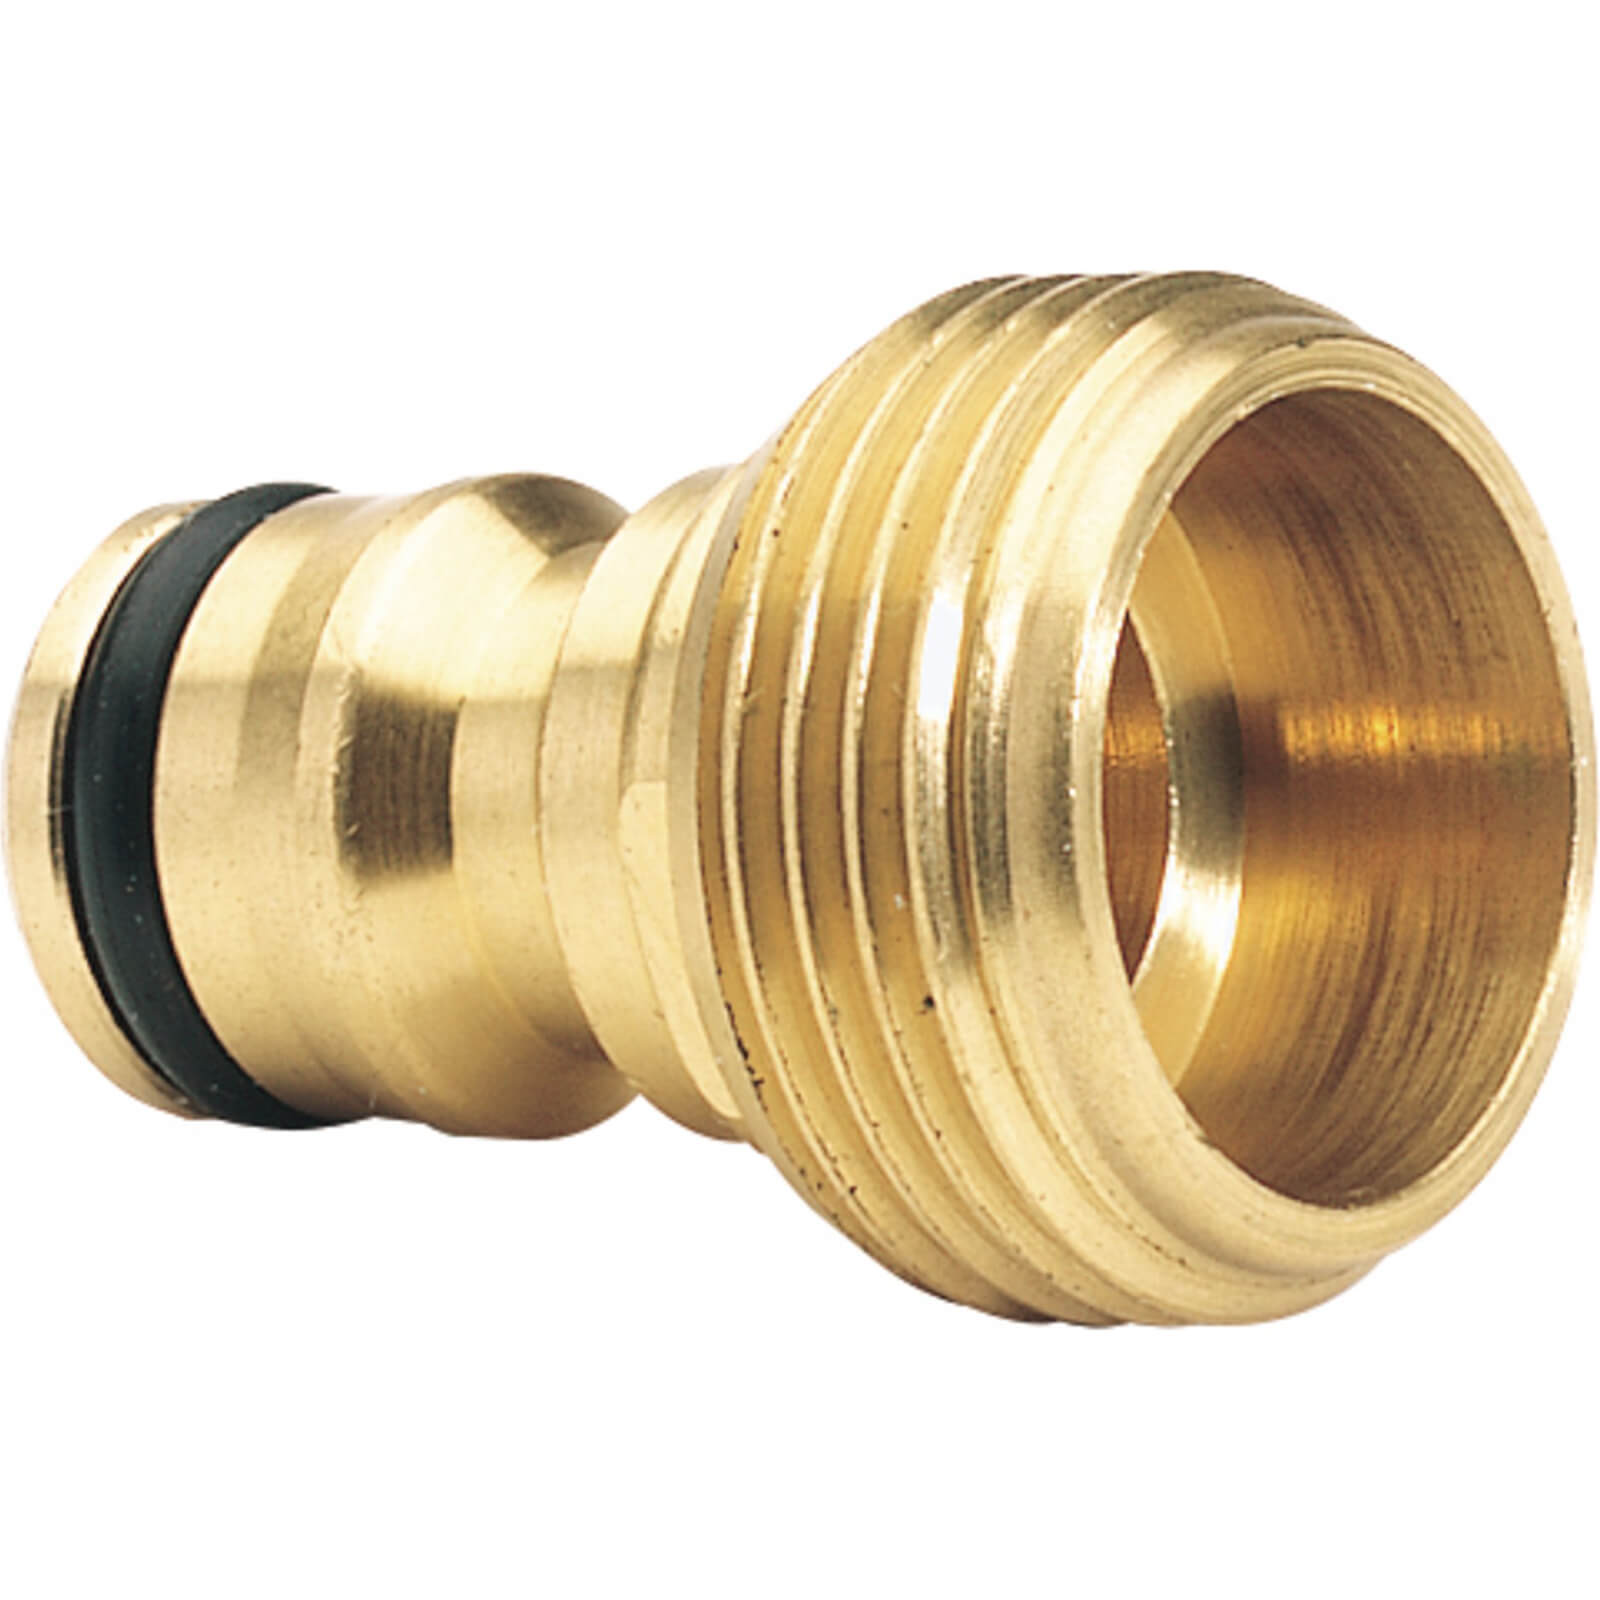 Image of Draper Expert Brass Hose Pipe Accessory Connector 3/4" / 19mm Pack of 1